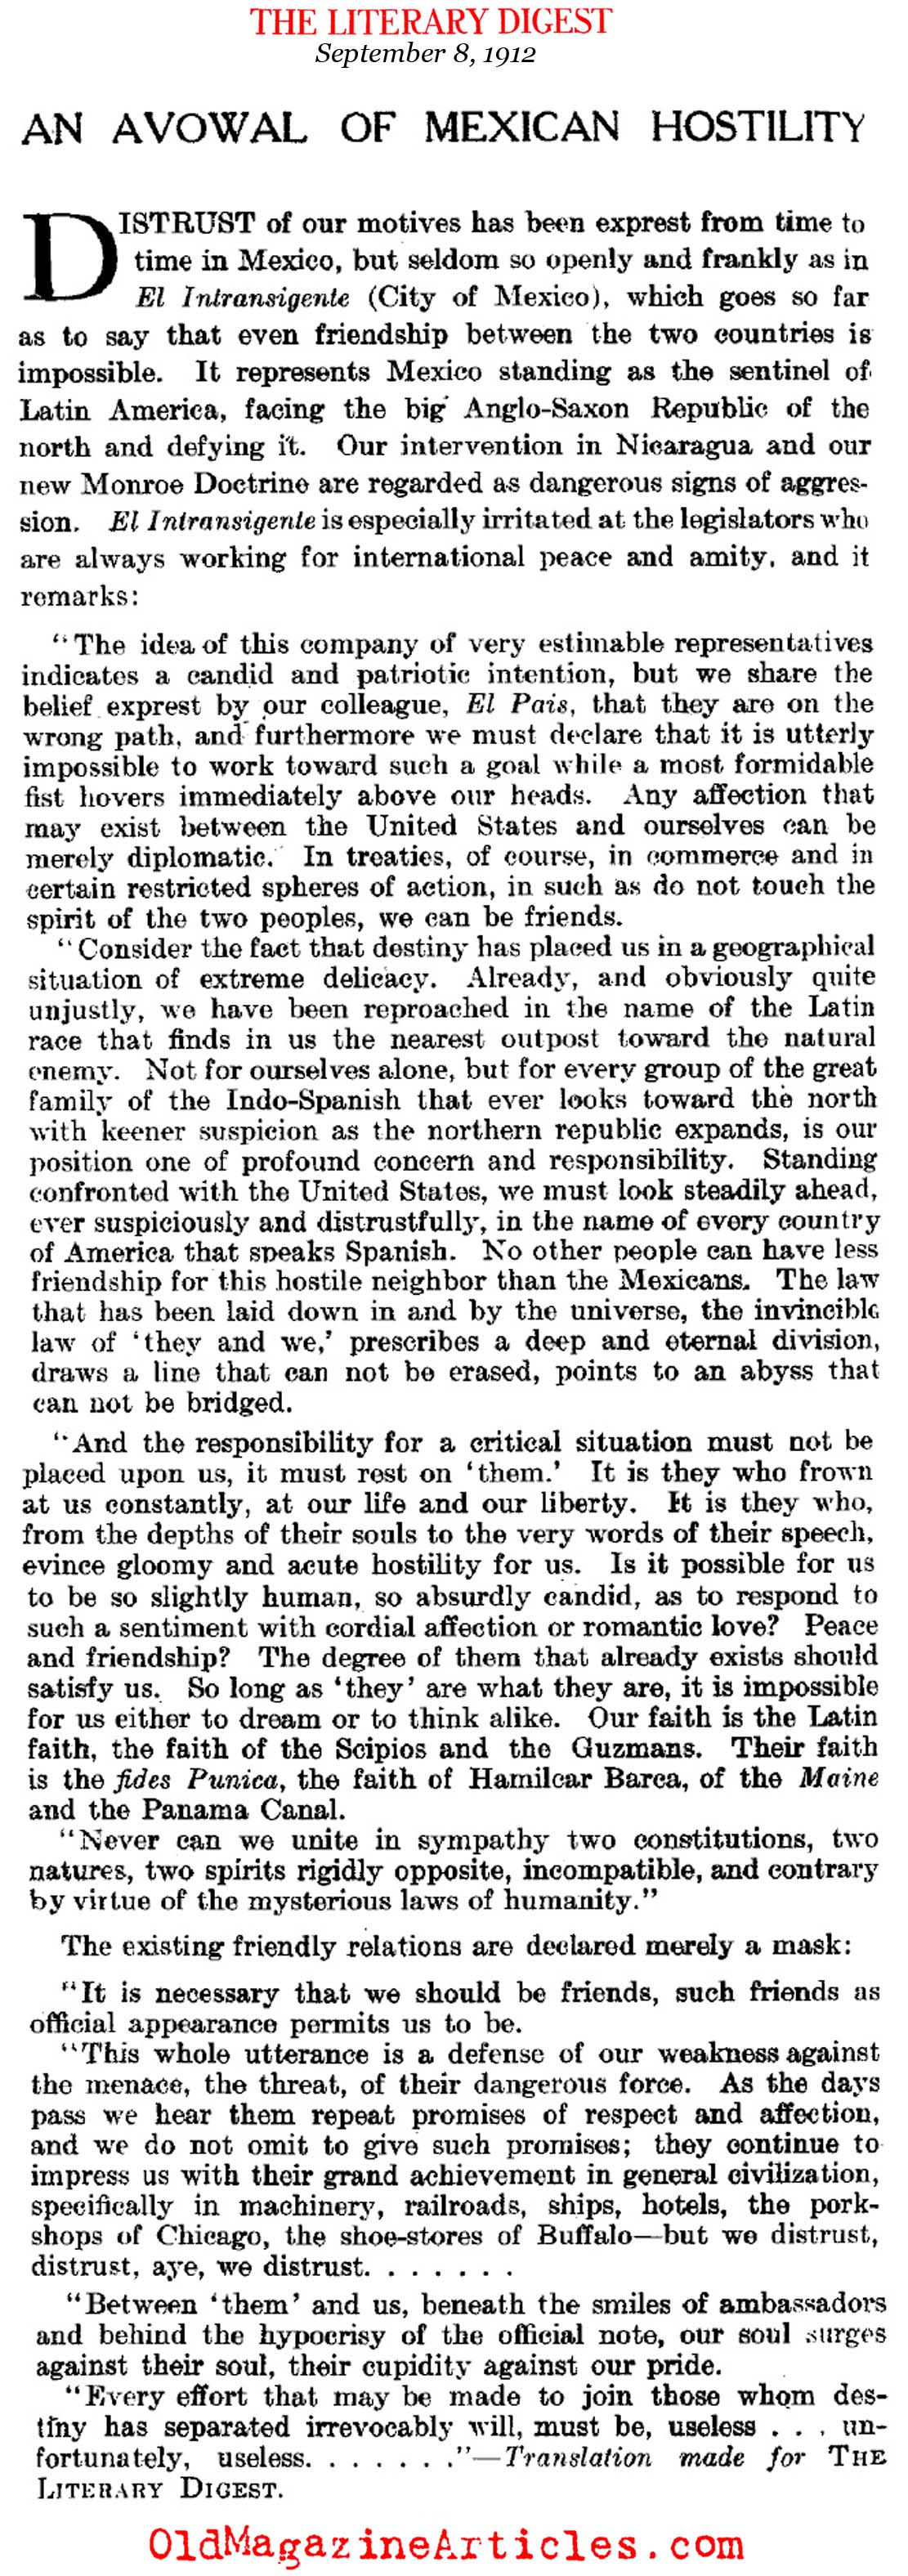 Mexican Hatred of the United States (Literary Digest, 1912)